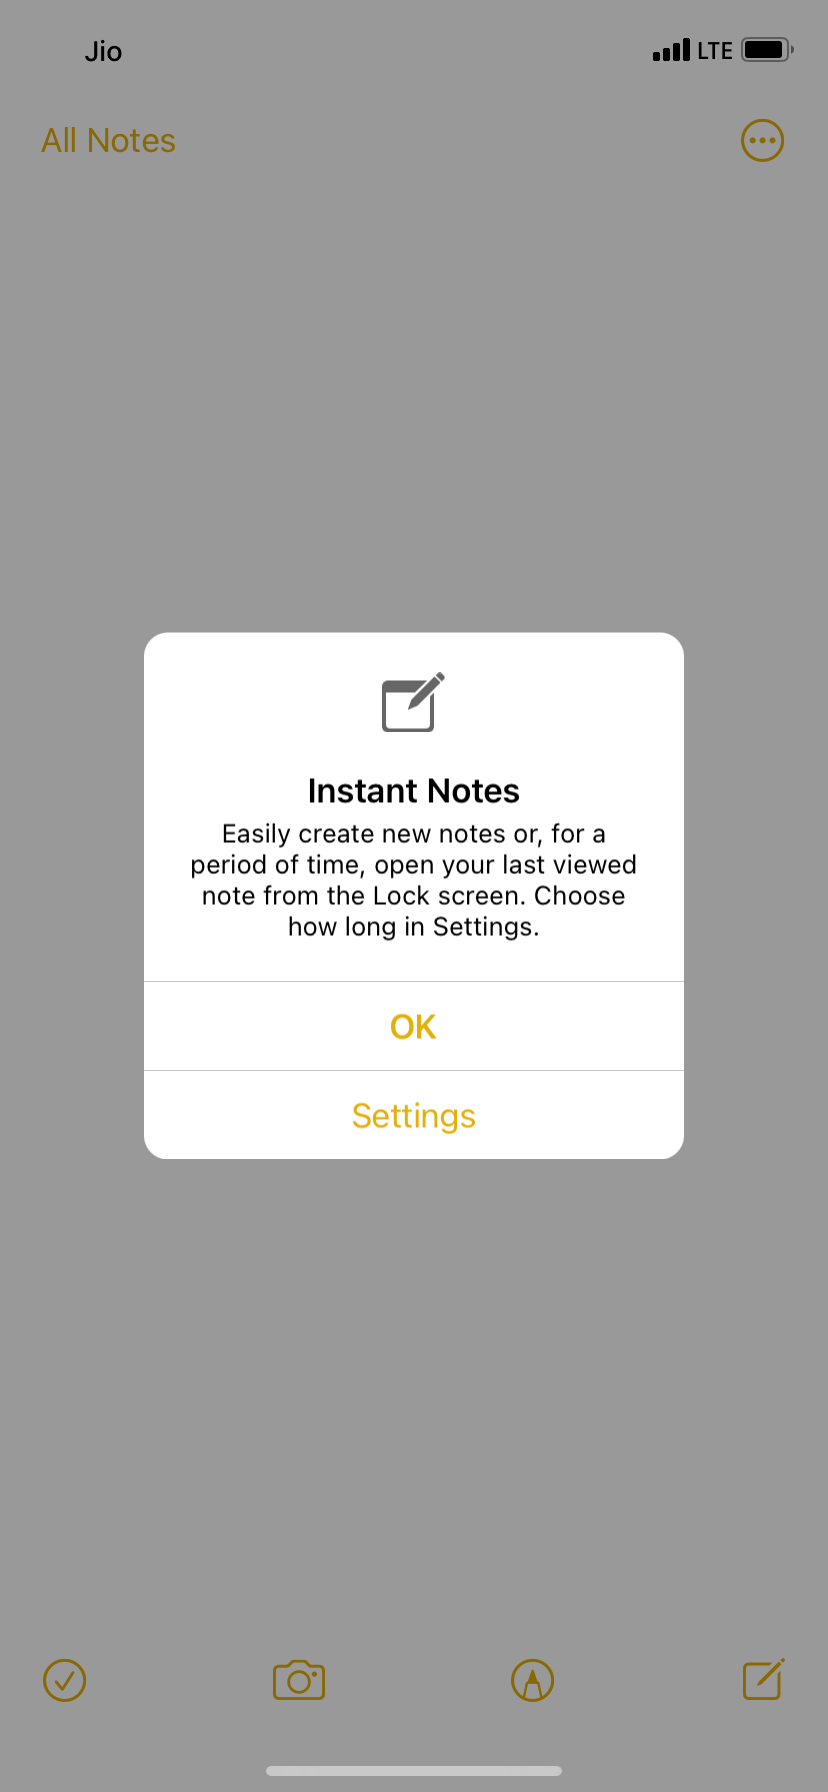 Instant Notes from iPhone Lock Screen